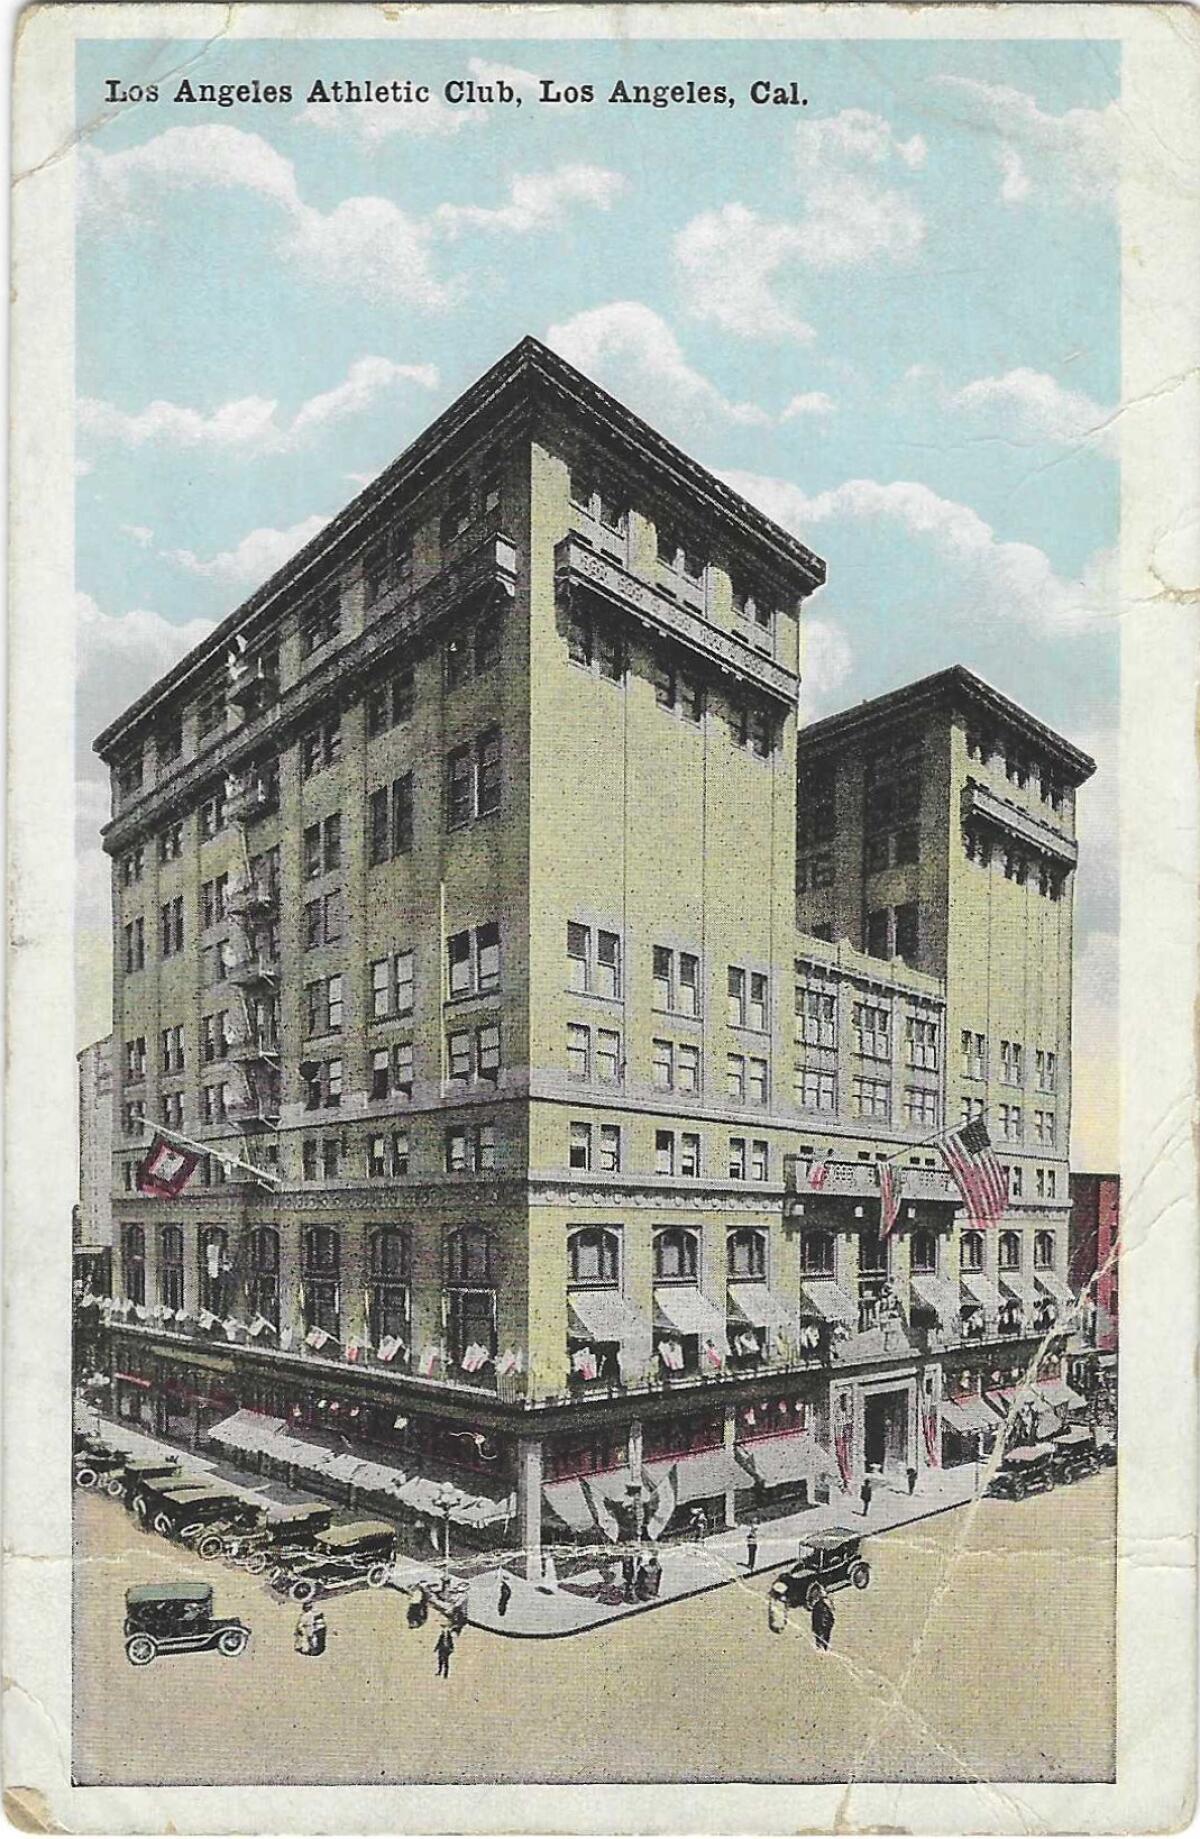 Exterior view of Los Angeles Athletic Club